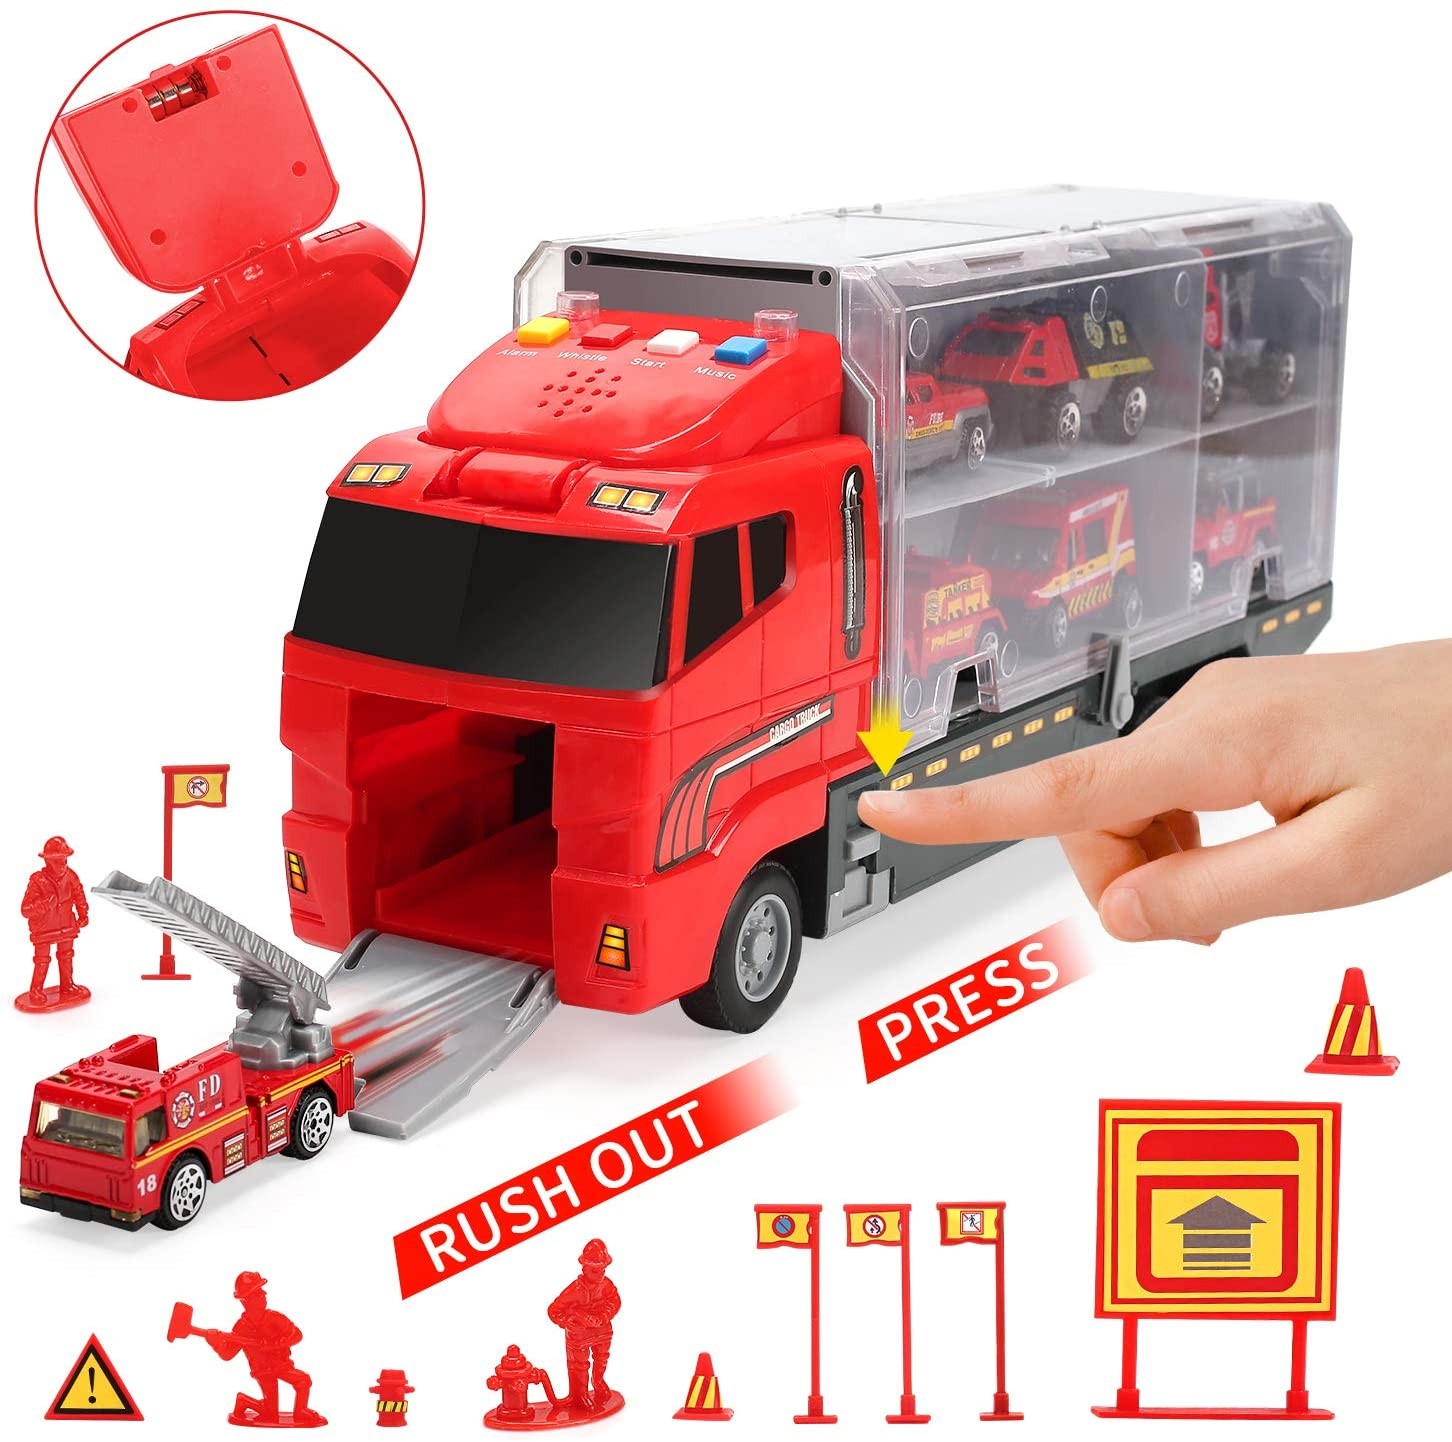 28 in 1 Fire Trucks with Sound and Light, Friction Powered Cars with 10 Mini Firetrucks, Rescue Emergency Double Side Carrier Truck Set Birthday Gift for Boys, Girls, Toddlers Kids Age 3+